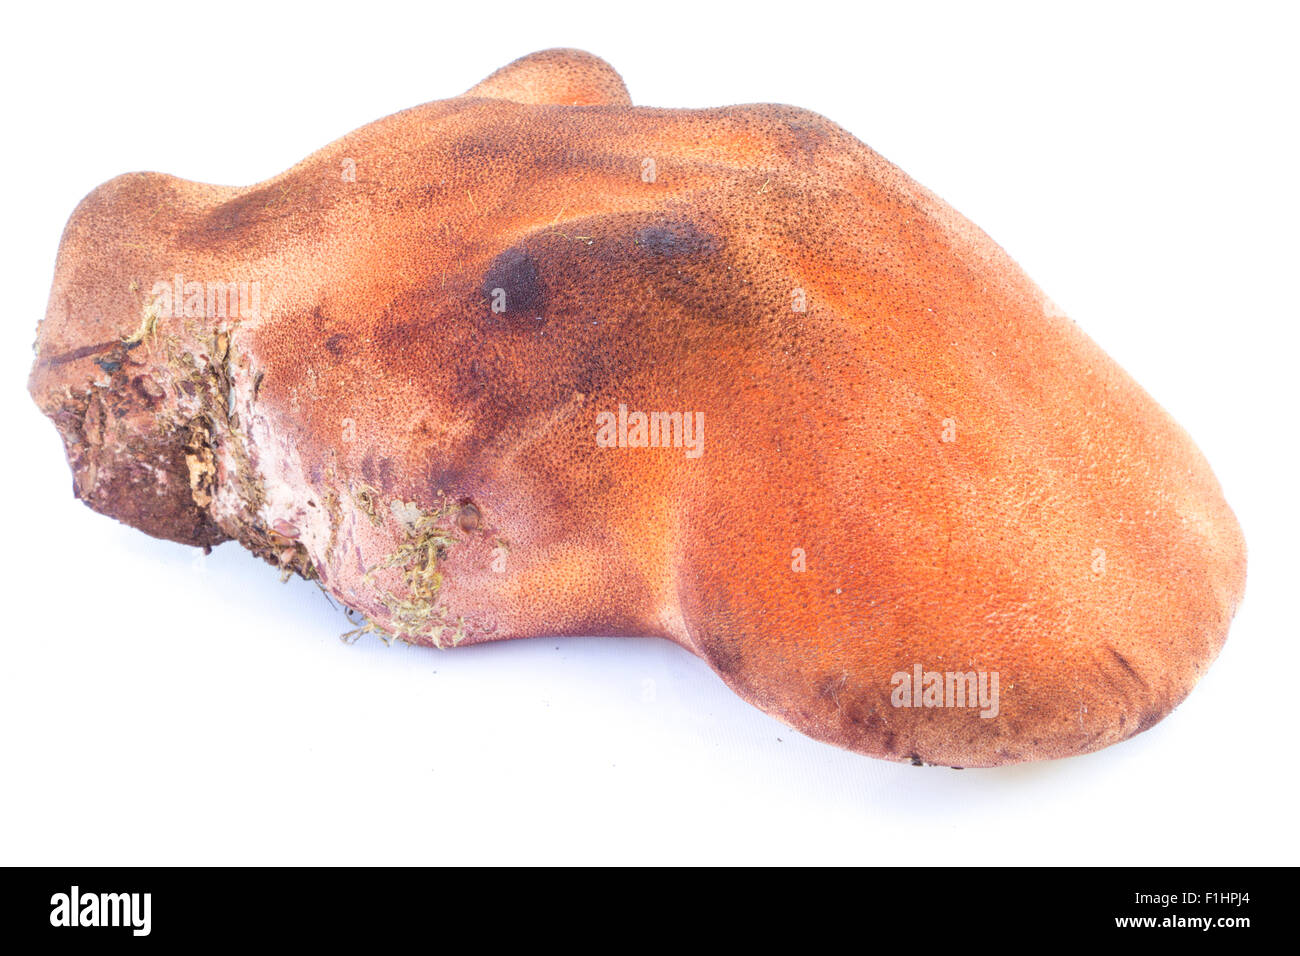 Beefsteak fungus also known as ox tongue (Fistulina hepatica) Stock Photo